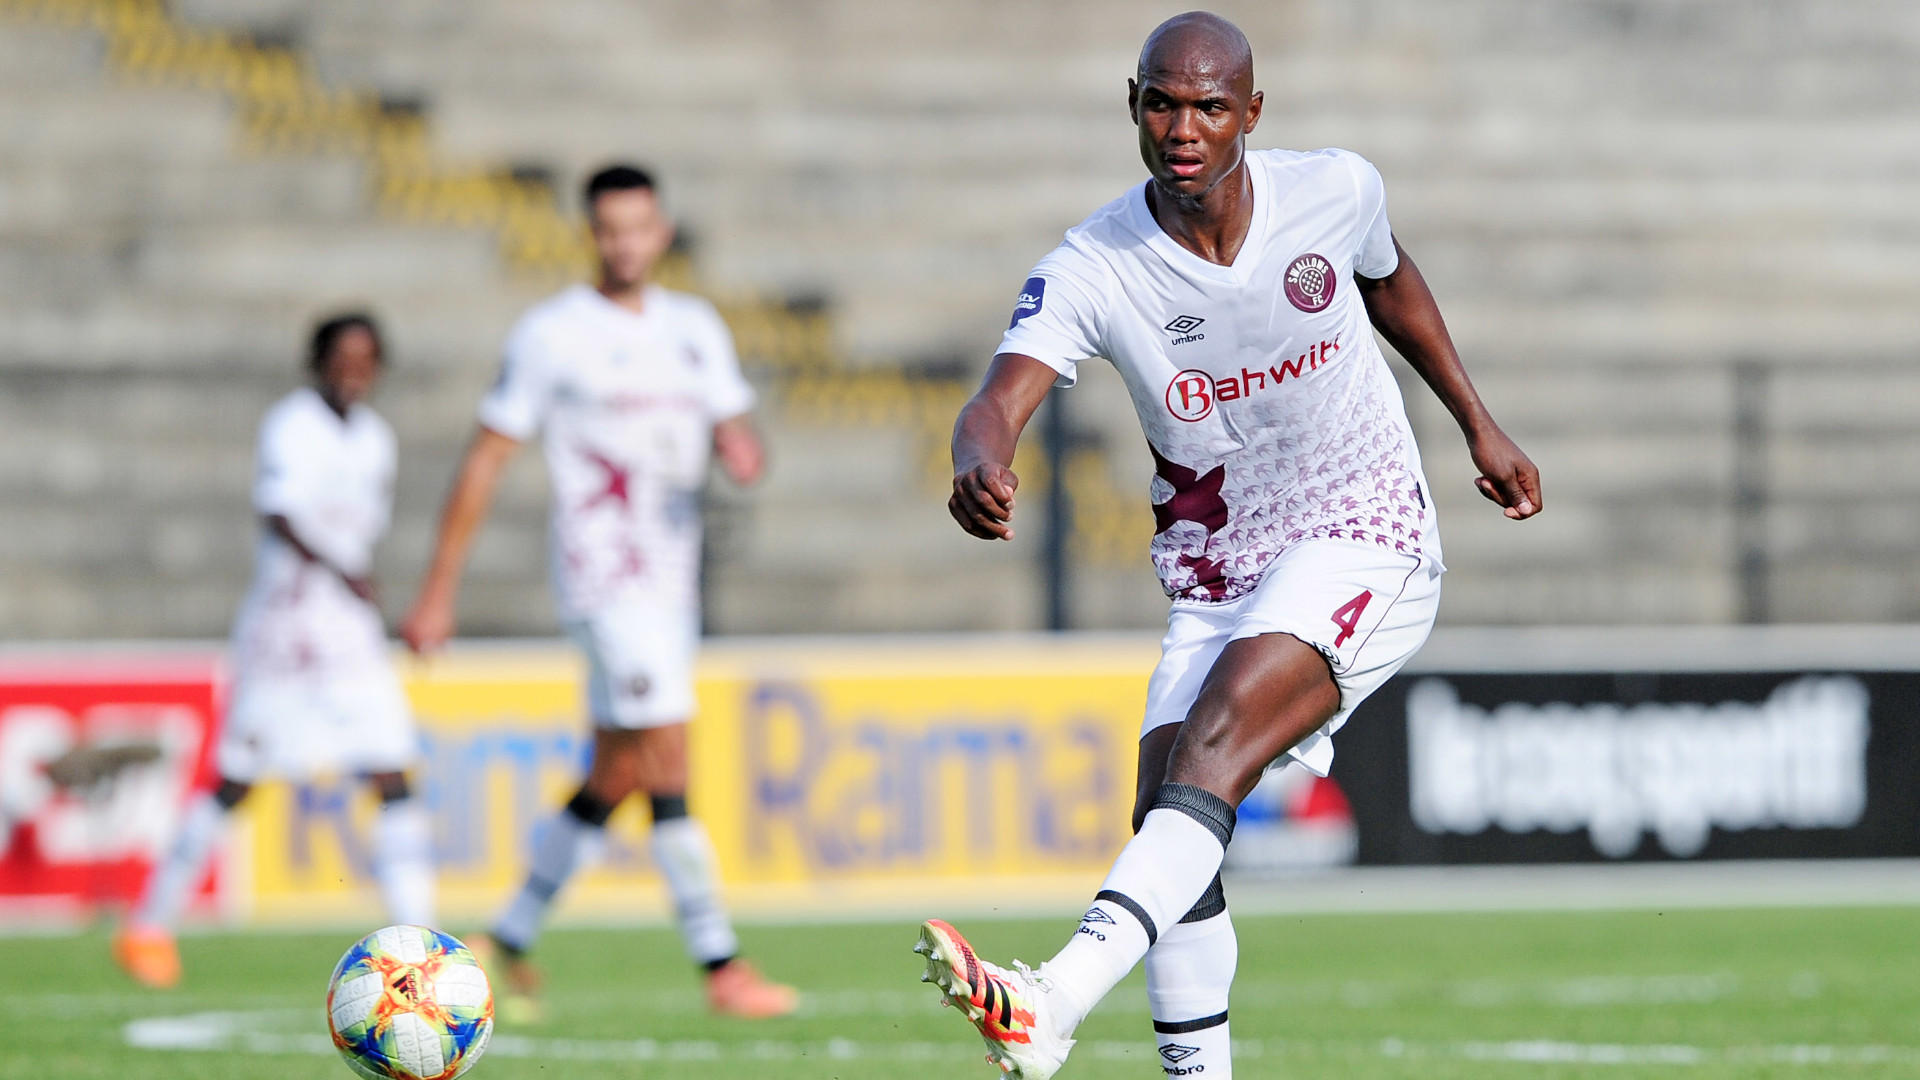 Kaizer Chiefs' chances of signing Ngcobo suffer blow after Swallows boss issues hands-off